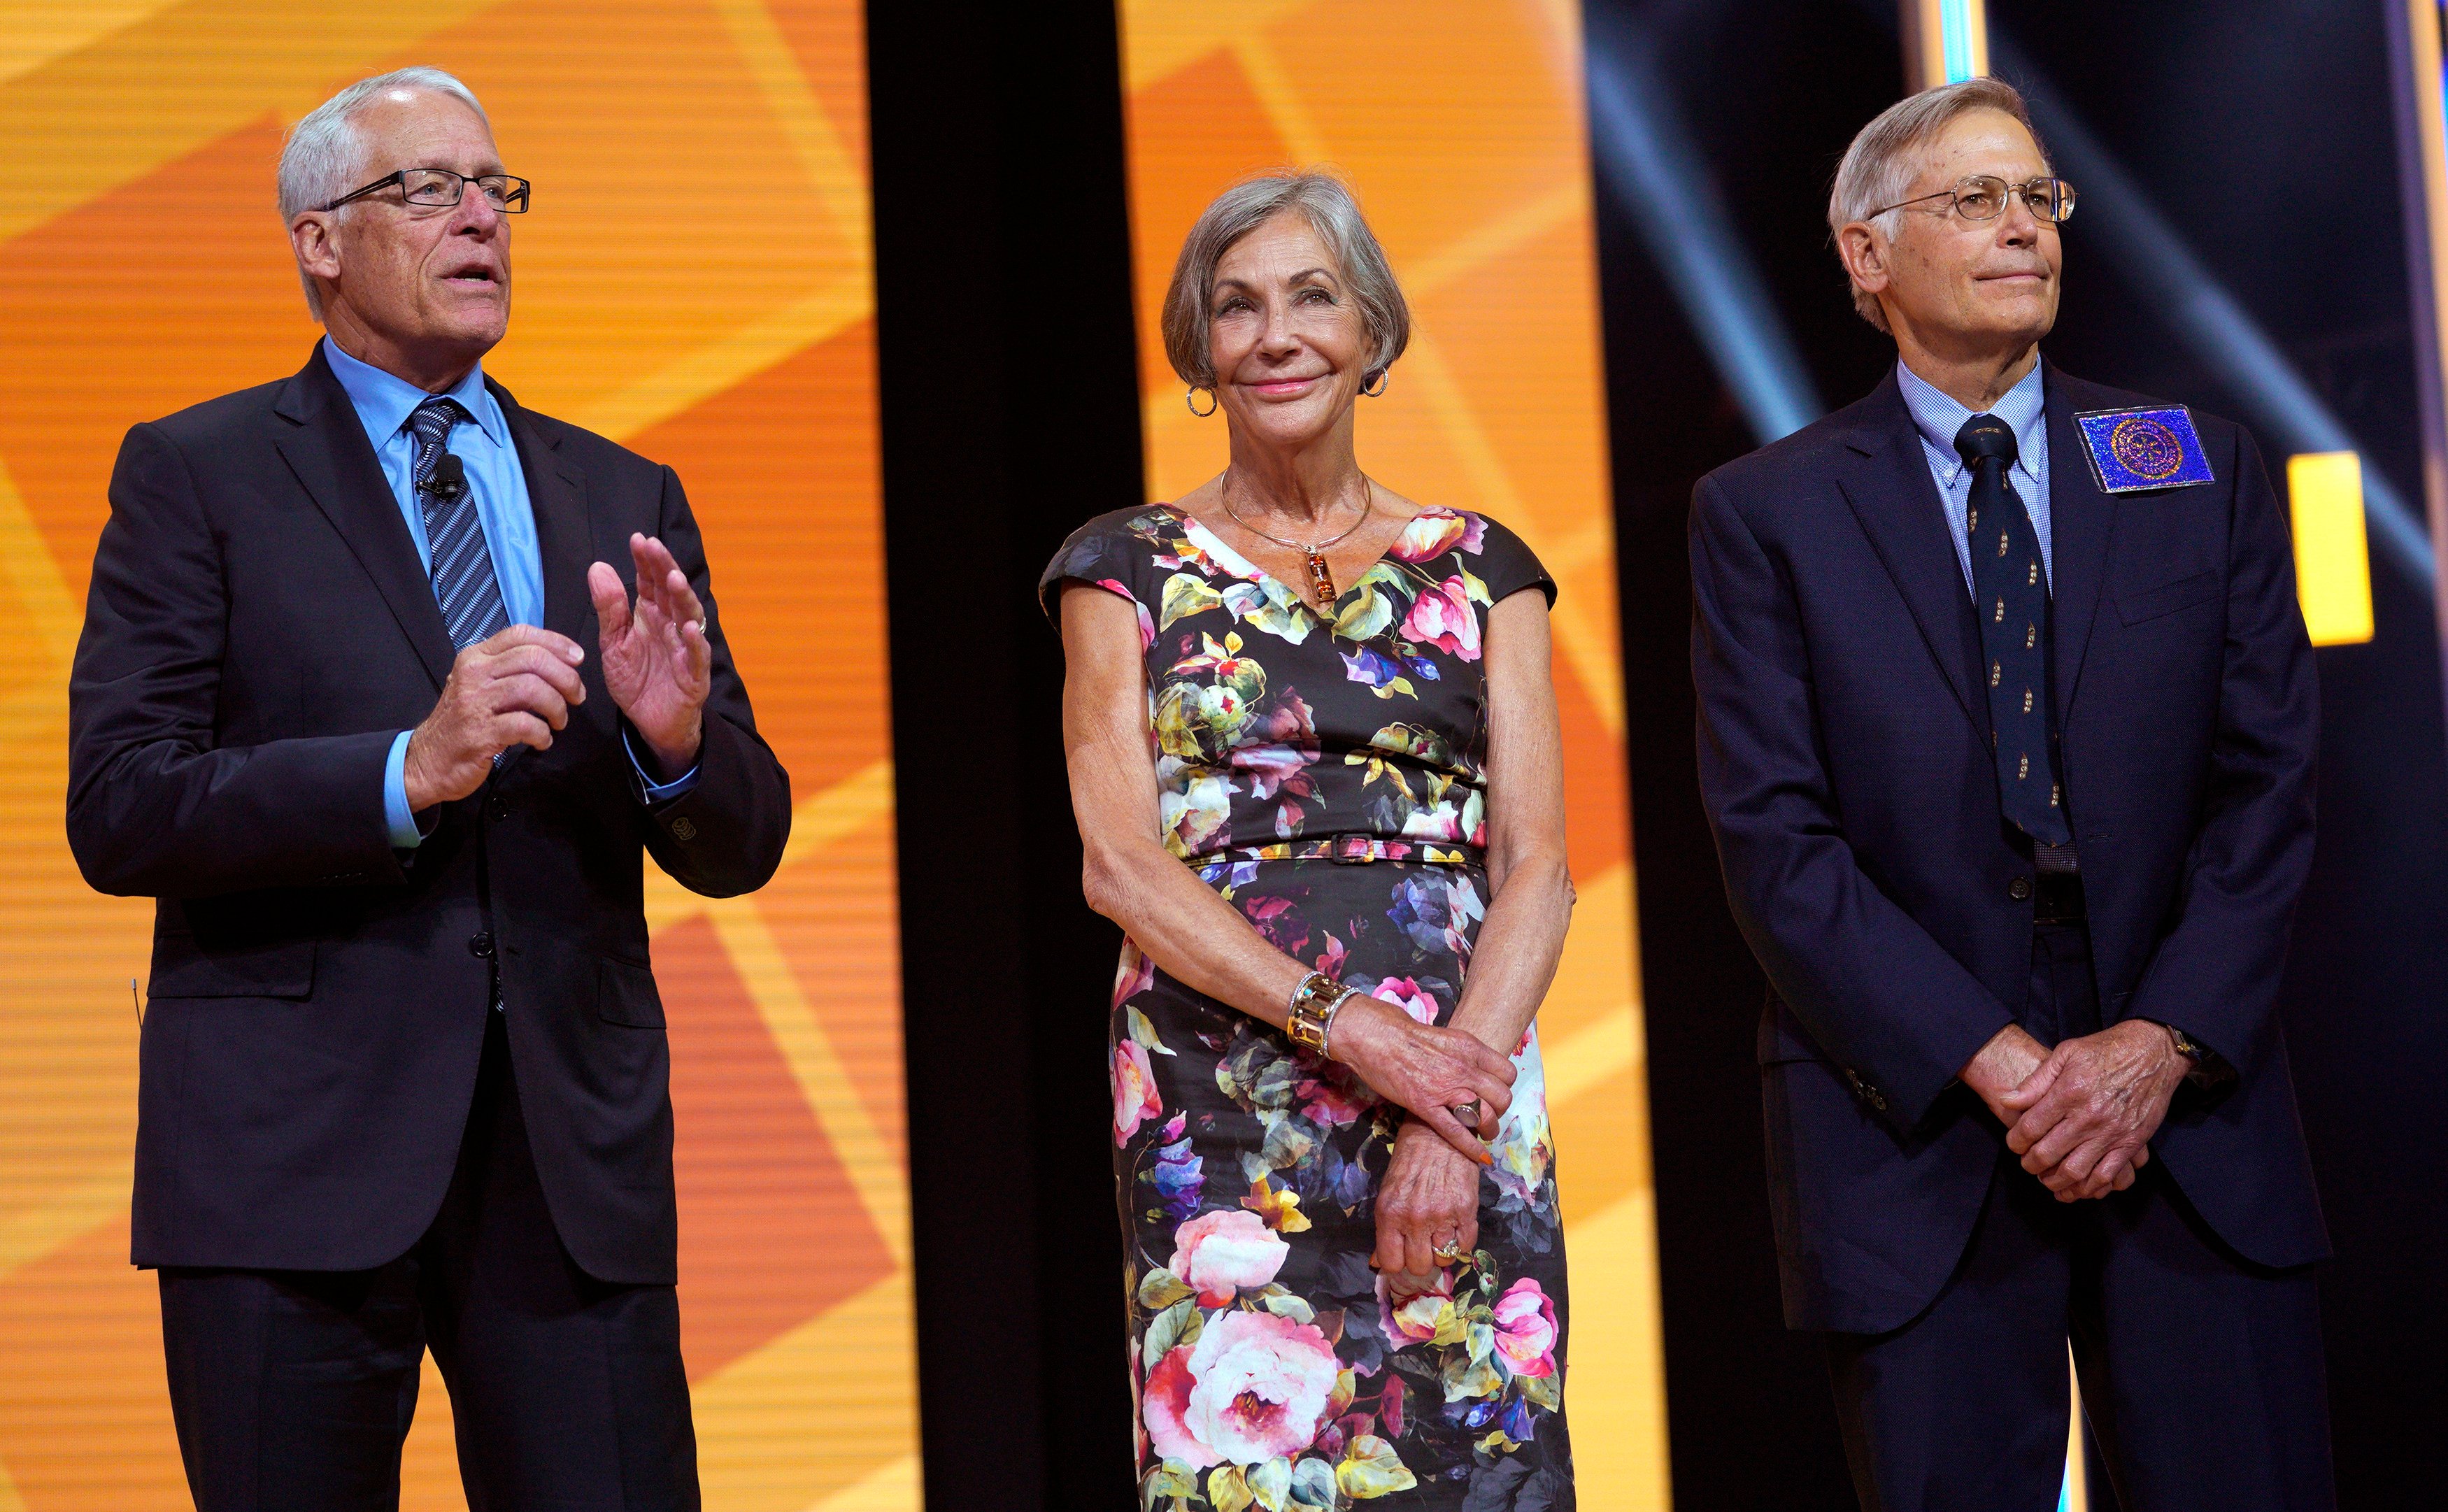 Rob, Alice and Jim Walton are all members of the enormously wealthy Walton family. Photo: Getty Images